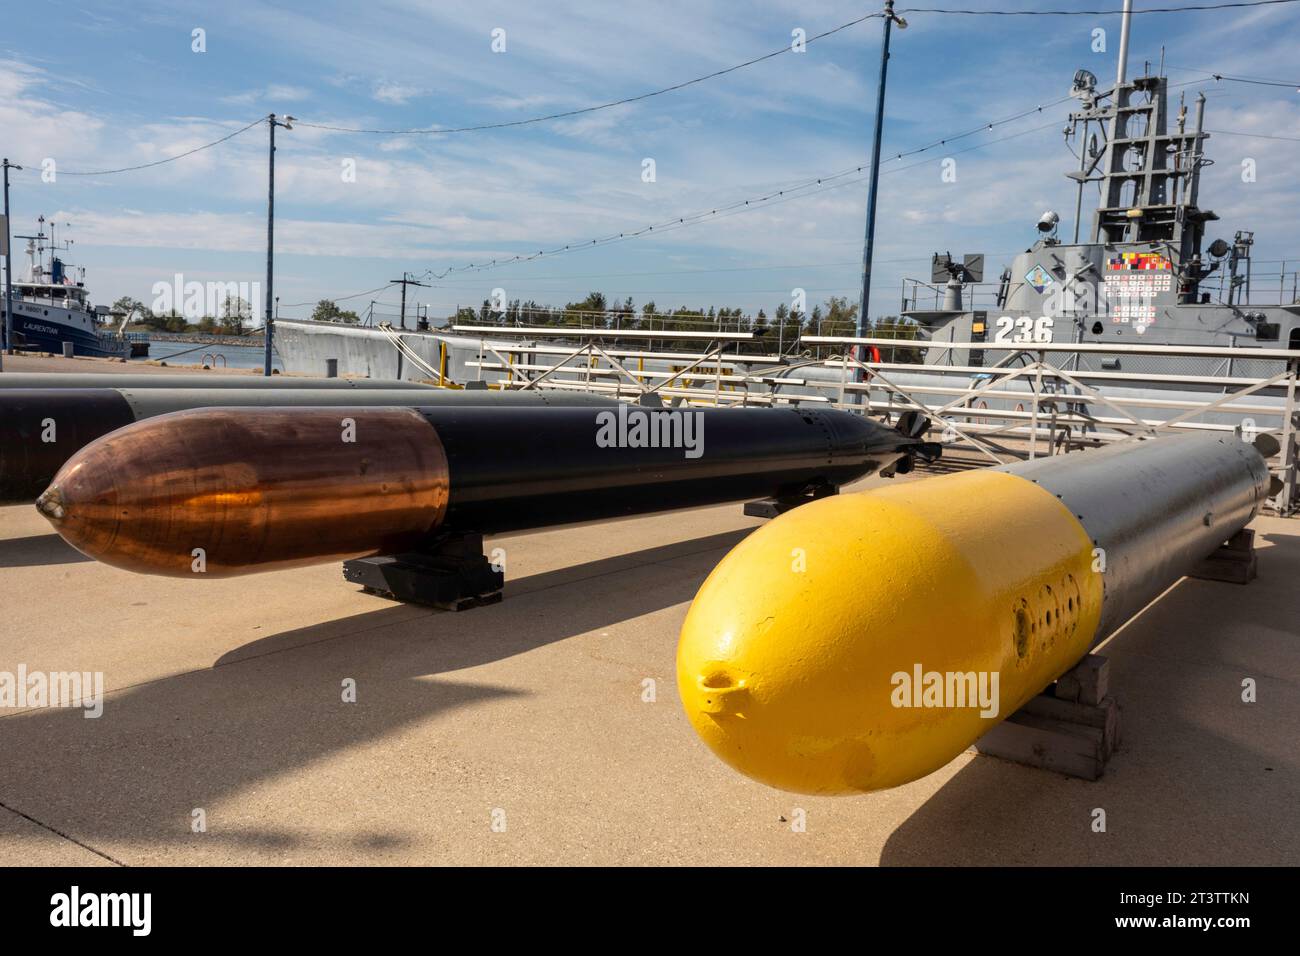 Muskegon, Michigan - Torpedoes on display outside the USS Silversides Submarine Museum. Visitors can tour the museum and walk through the Silversides, Stock Photo